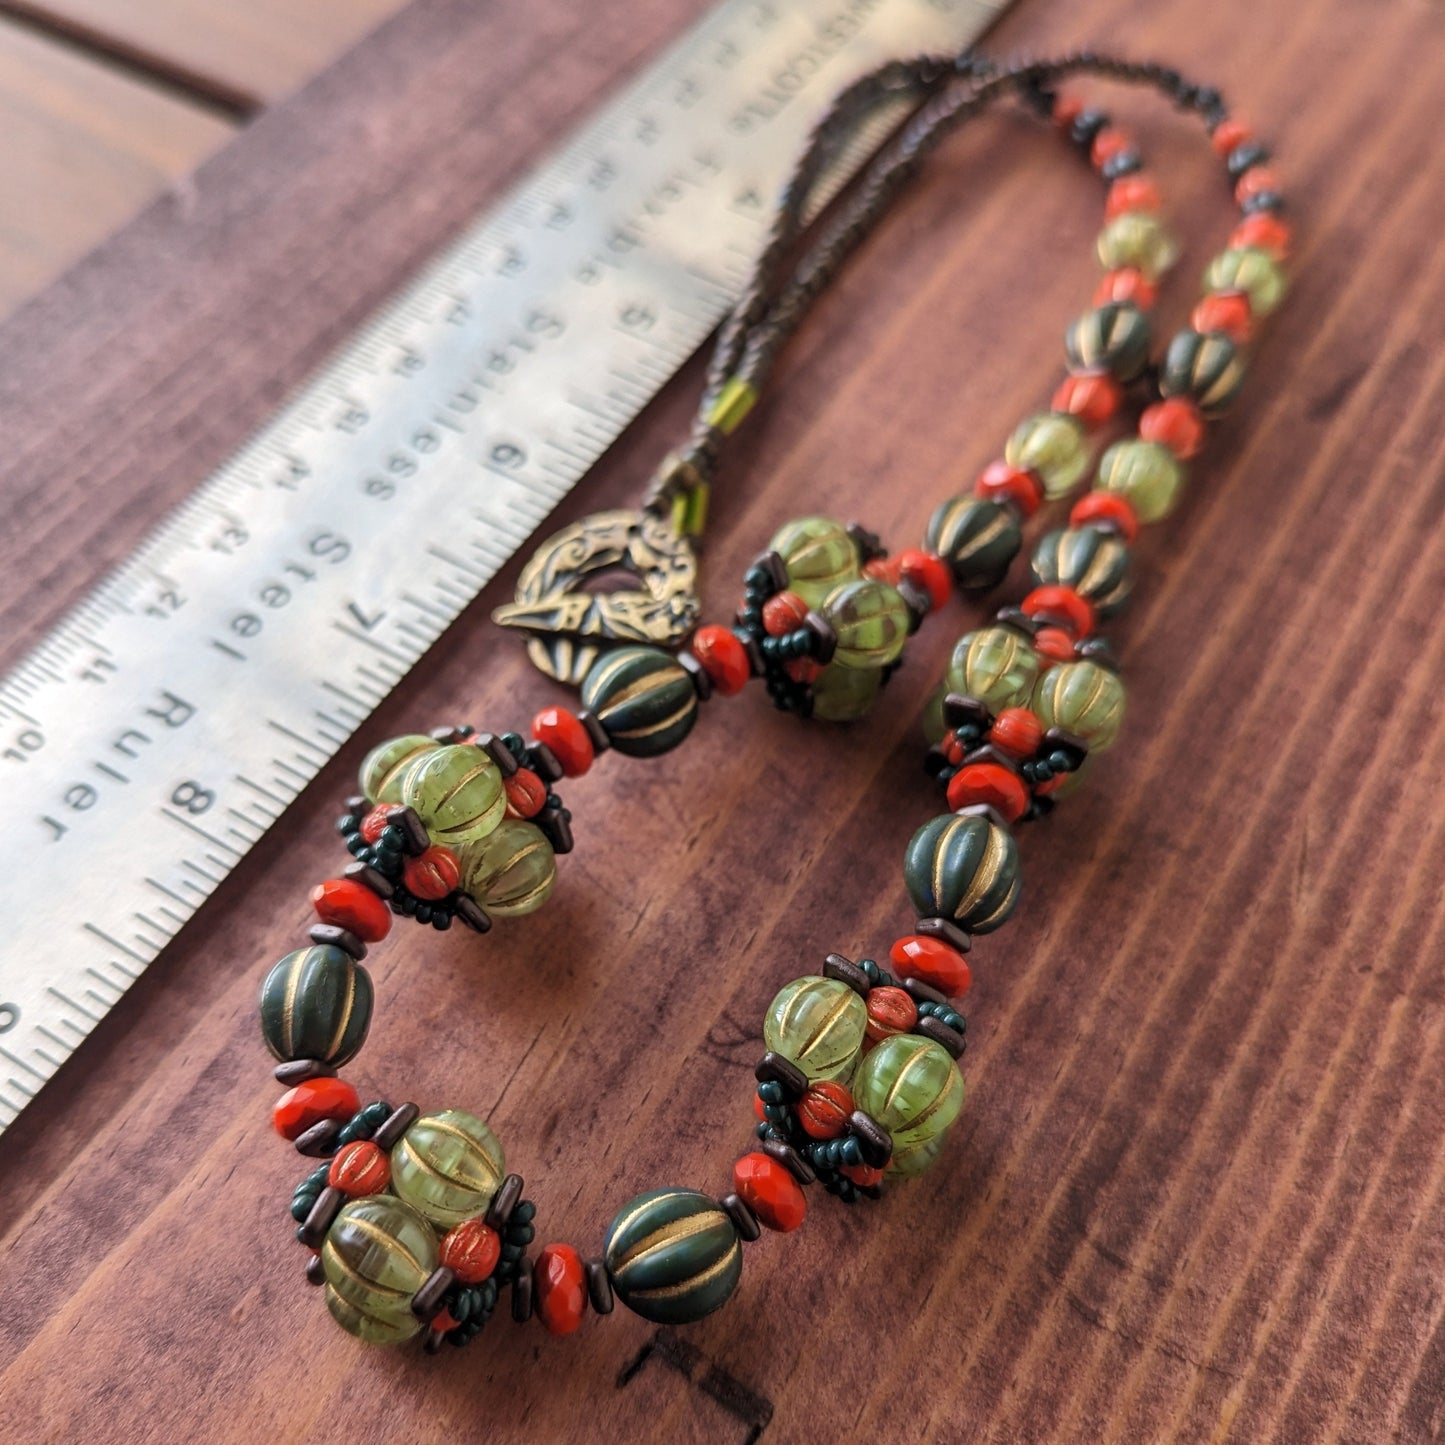 A beaded necklace made with alternating dark green and coral beads, with five pale green and orange beaded beads added into the pattern at the front. The necklace is laying on a reddish wooden board next to a ruler.